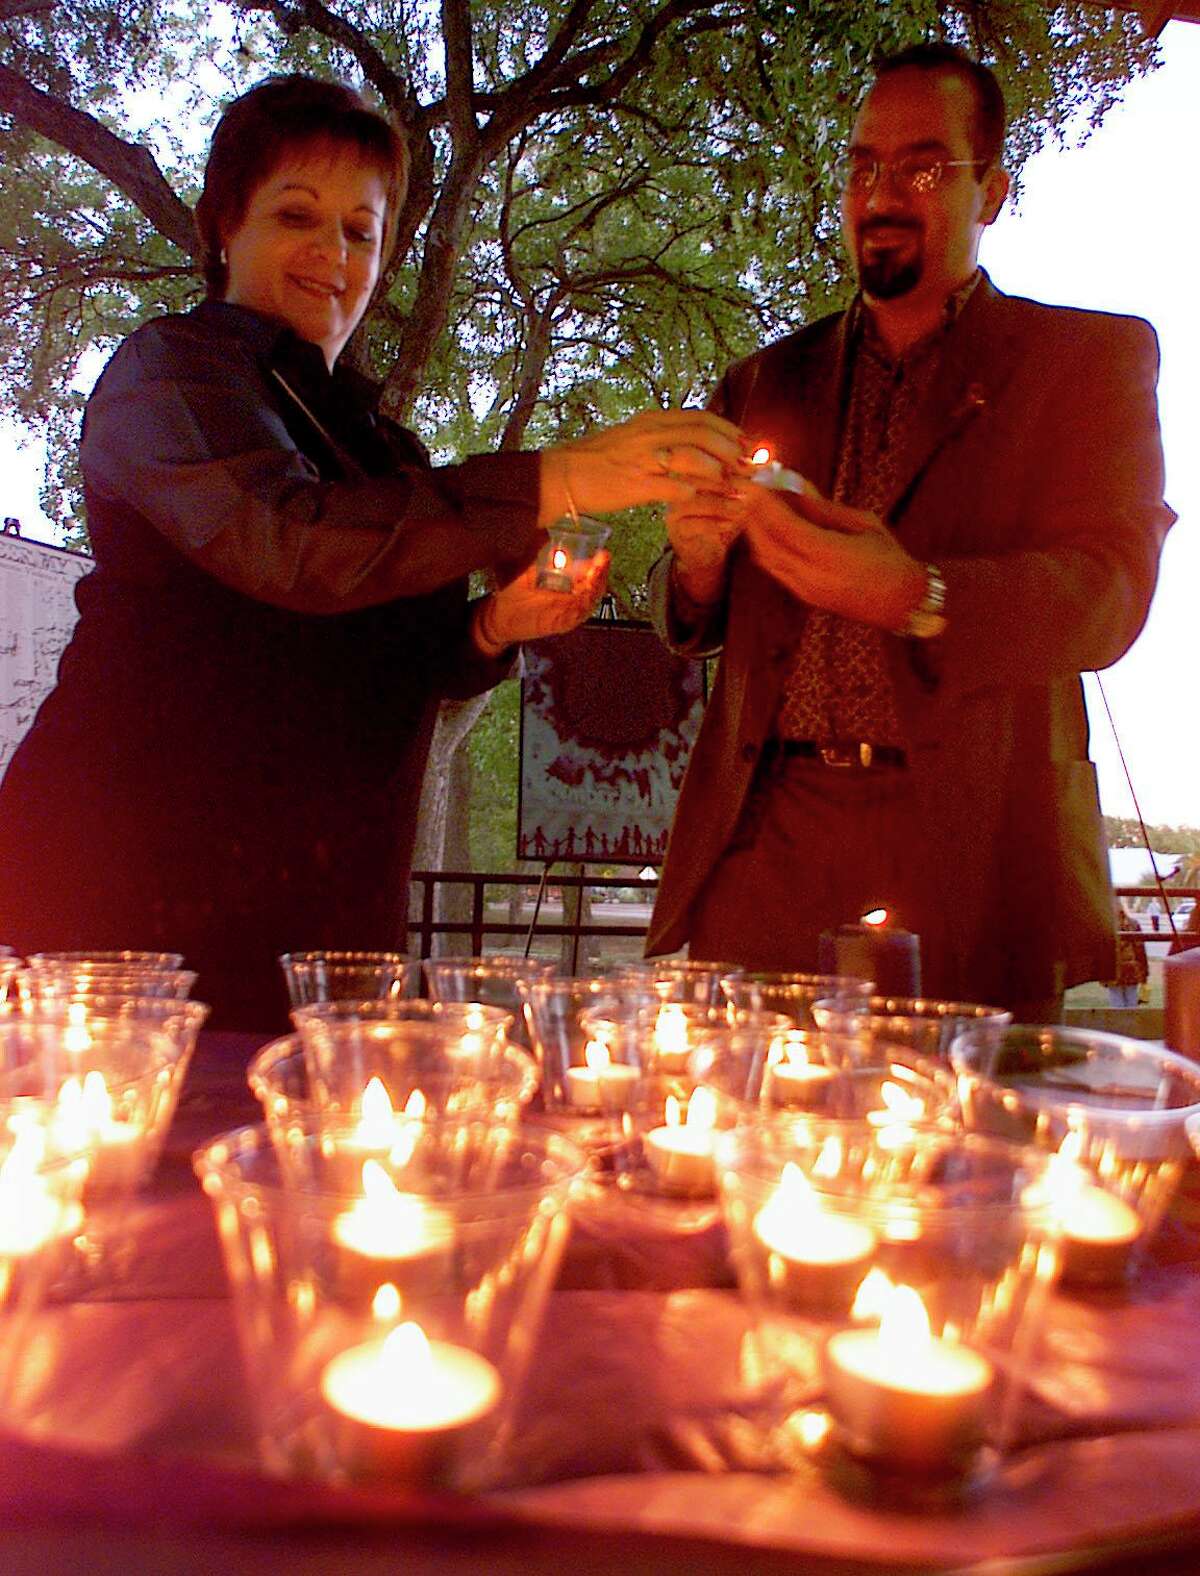 In this Oct. 21, 1999, file photo, Comal County Women’s Center counselor Ginger Gray, left, and executive director Danny Perez light candles at Landa Park in New Braunfels before a candlelight vigil honoring victims and survivors of domestic violence.